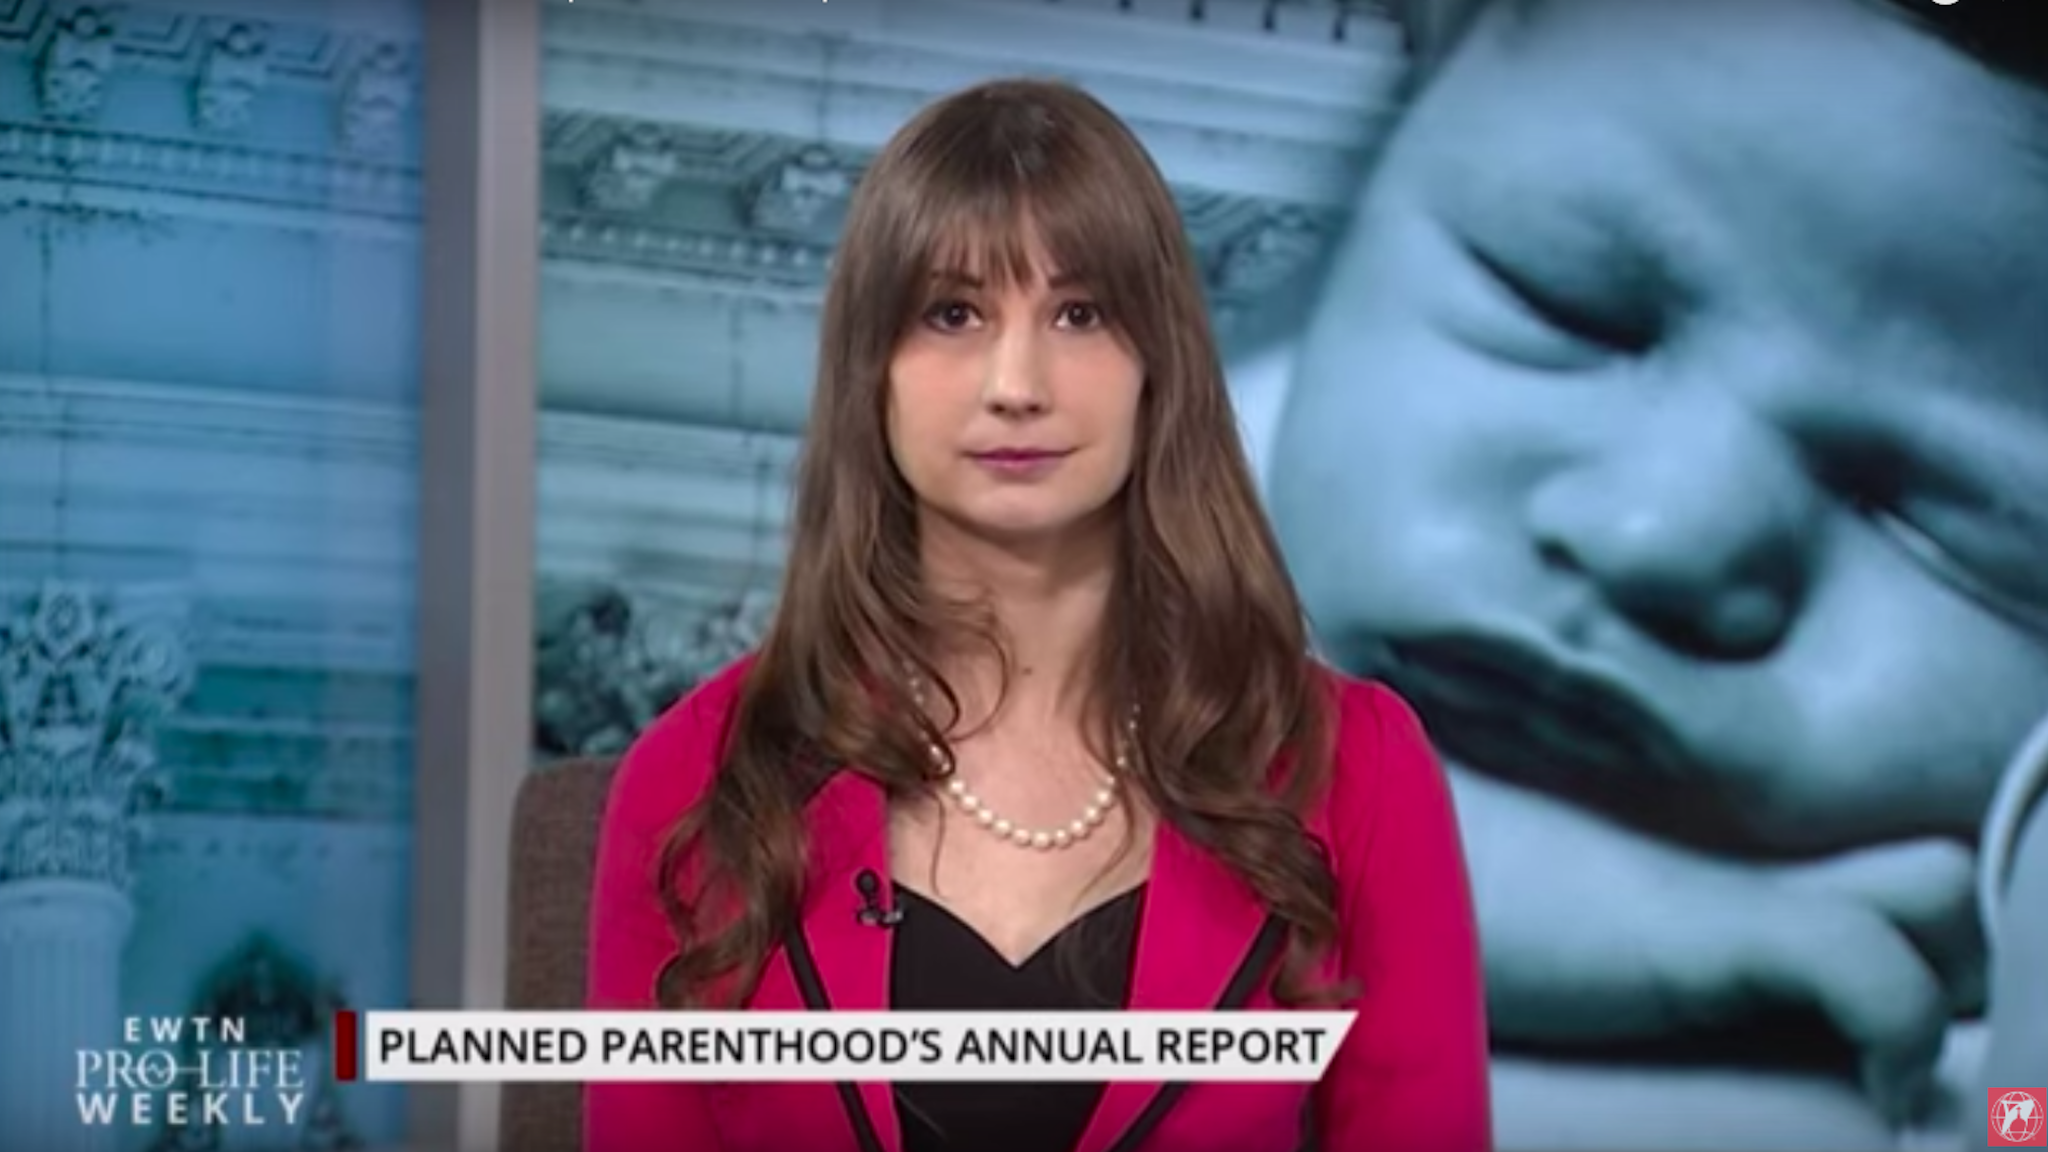 Ashe Schow appears on EWTN's "Pro-Life Weekly" to discuss Planned Parenthood's annual report.